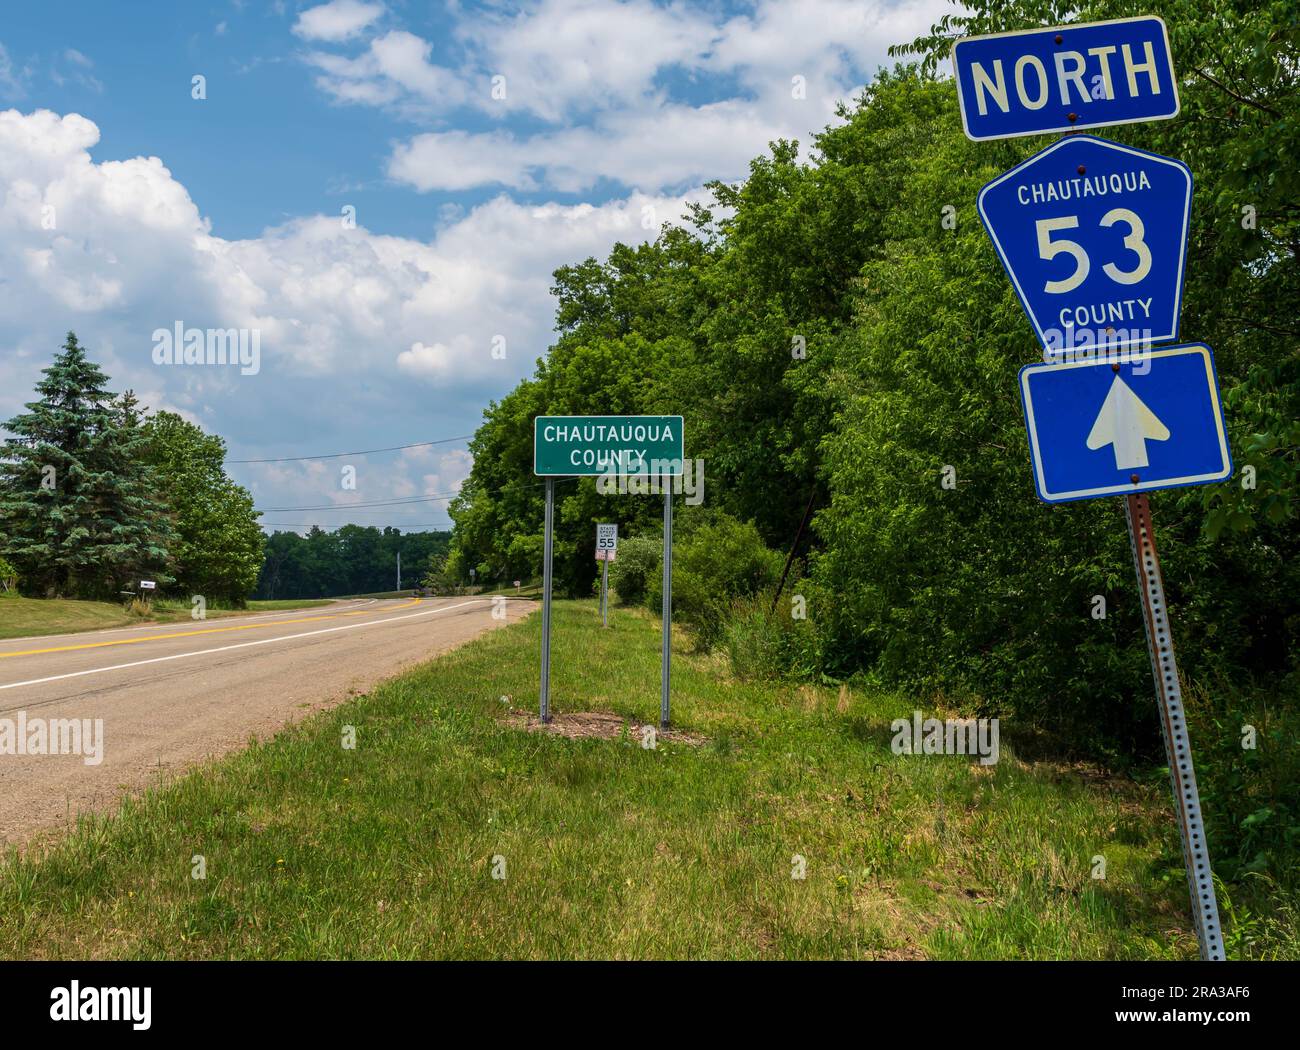 The State Route 53 North sign in front of the Chautauqua County sign in Carroll, New York, USA on a sunny summer day Stock Photo